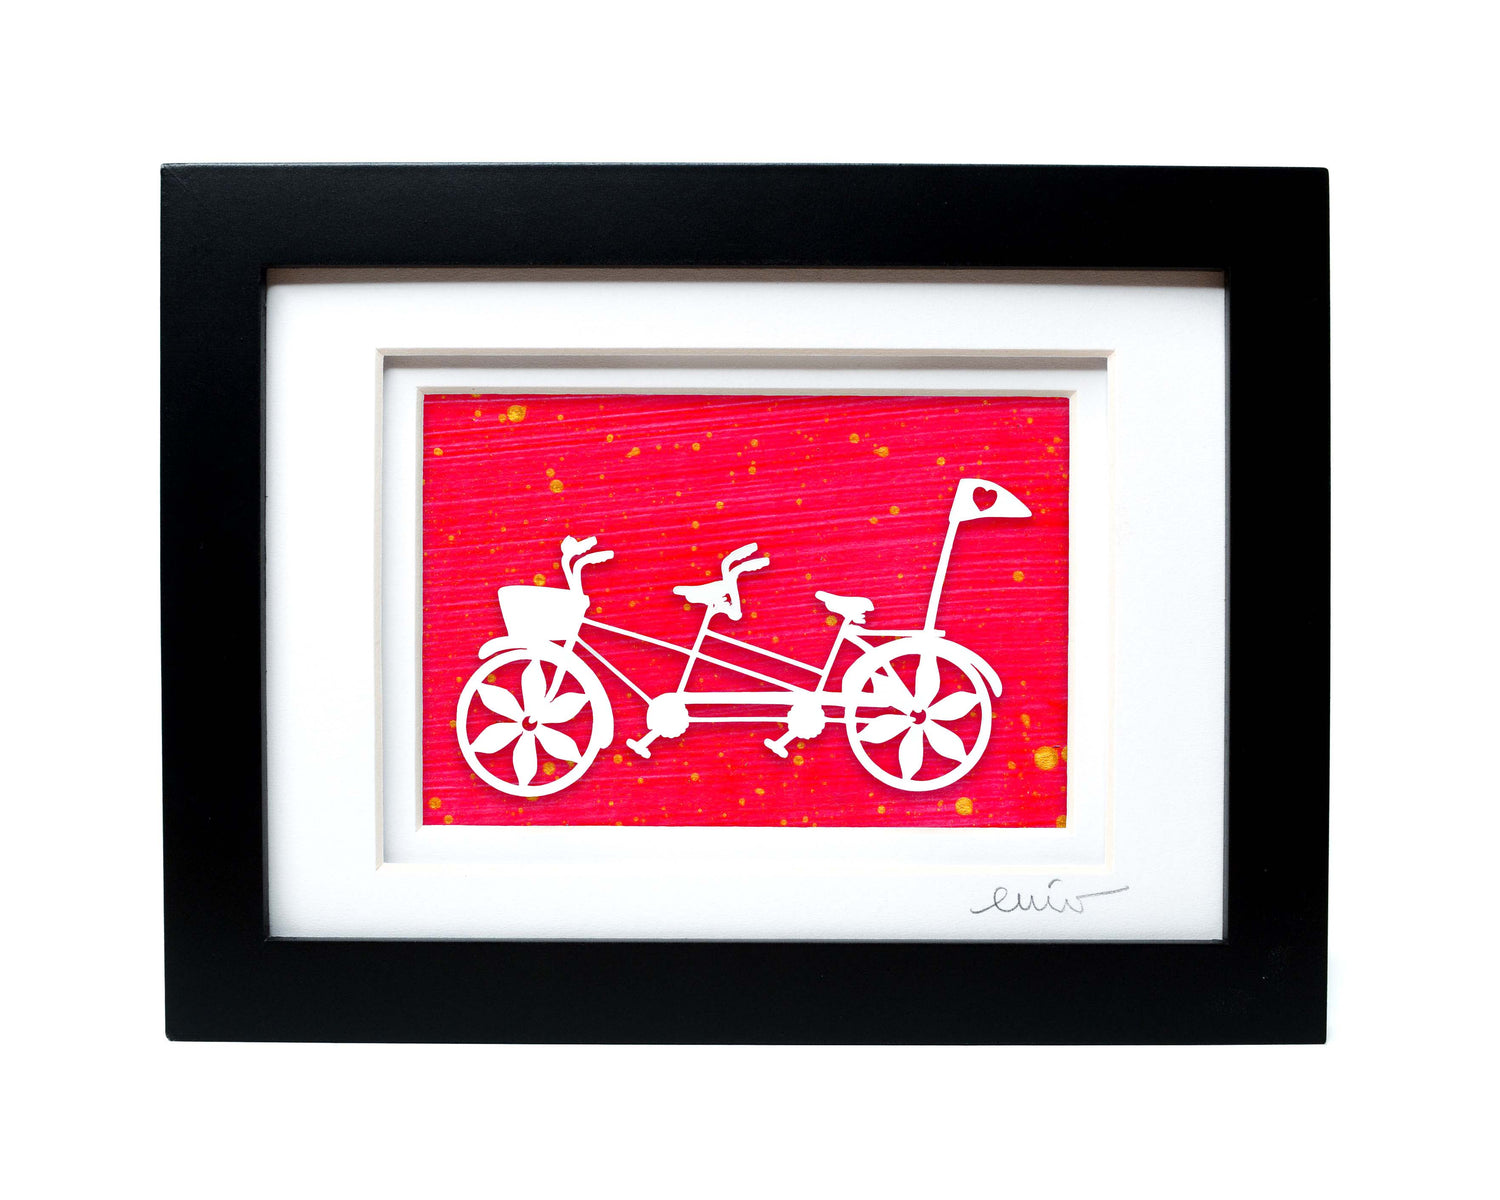 White tandem couples bike with heart flag papercut on hand painted neon pink background.